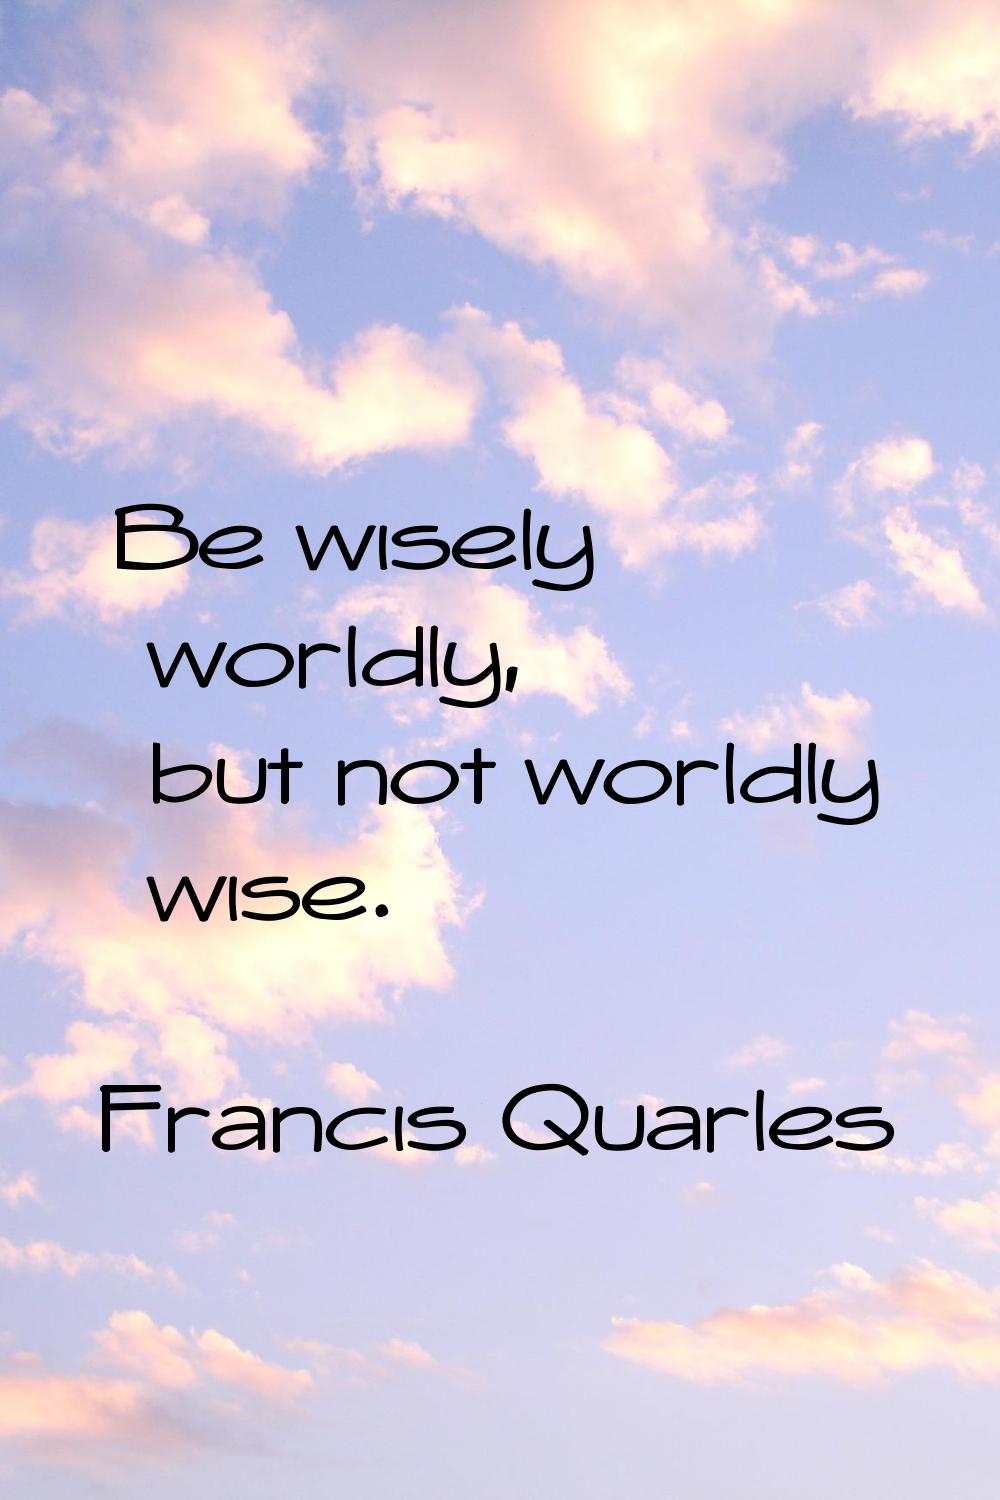 Be wisely worldly, but not worldly wise.